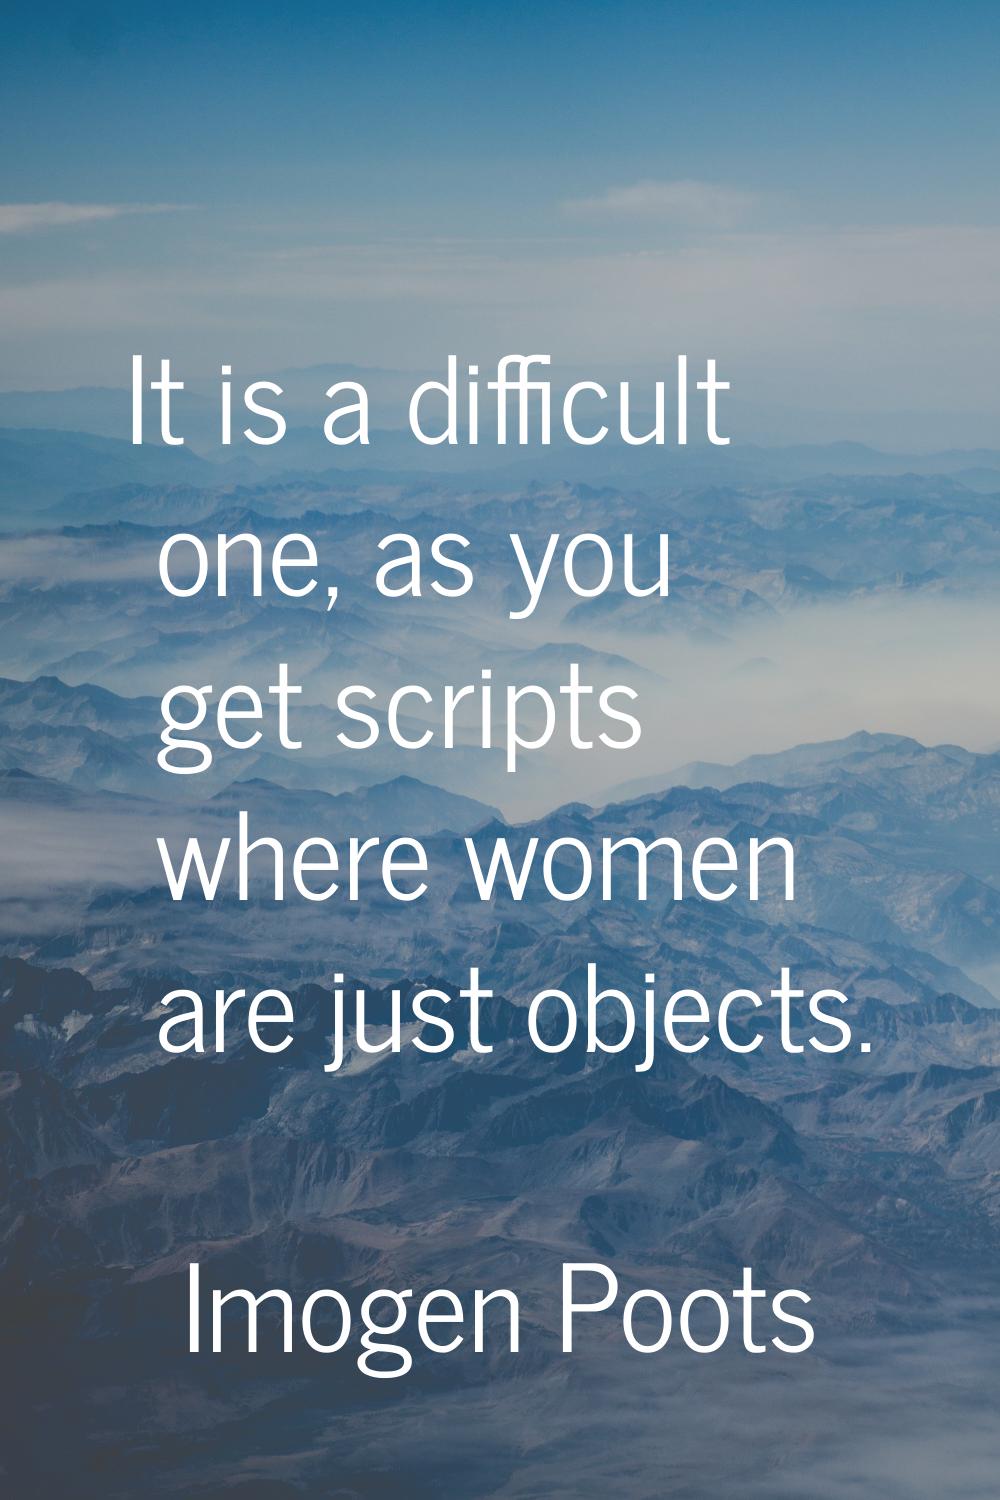 It is a difficult one, as you get scripts where women are just objects.